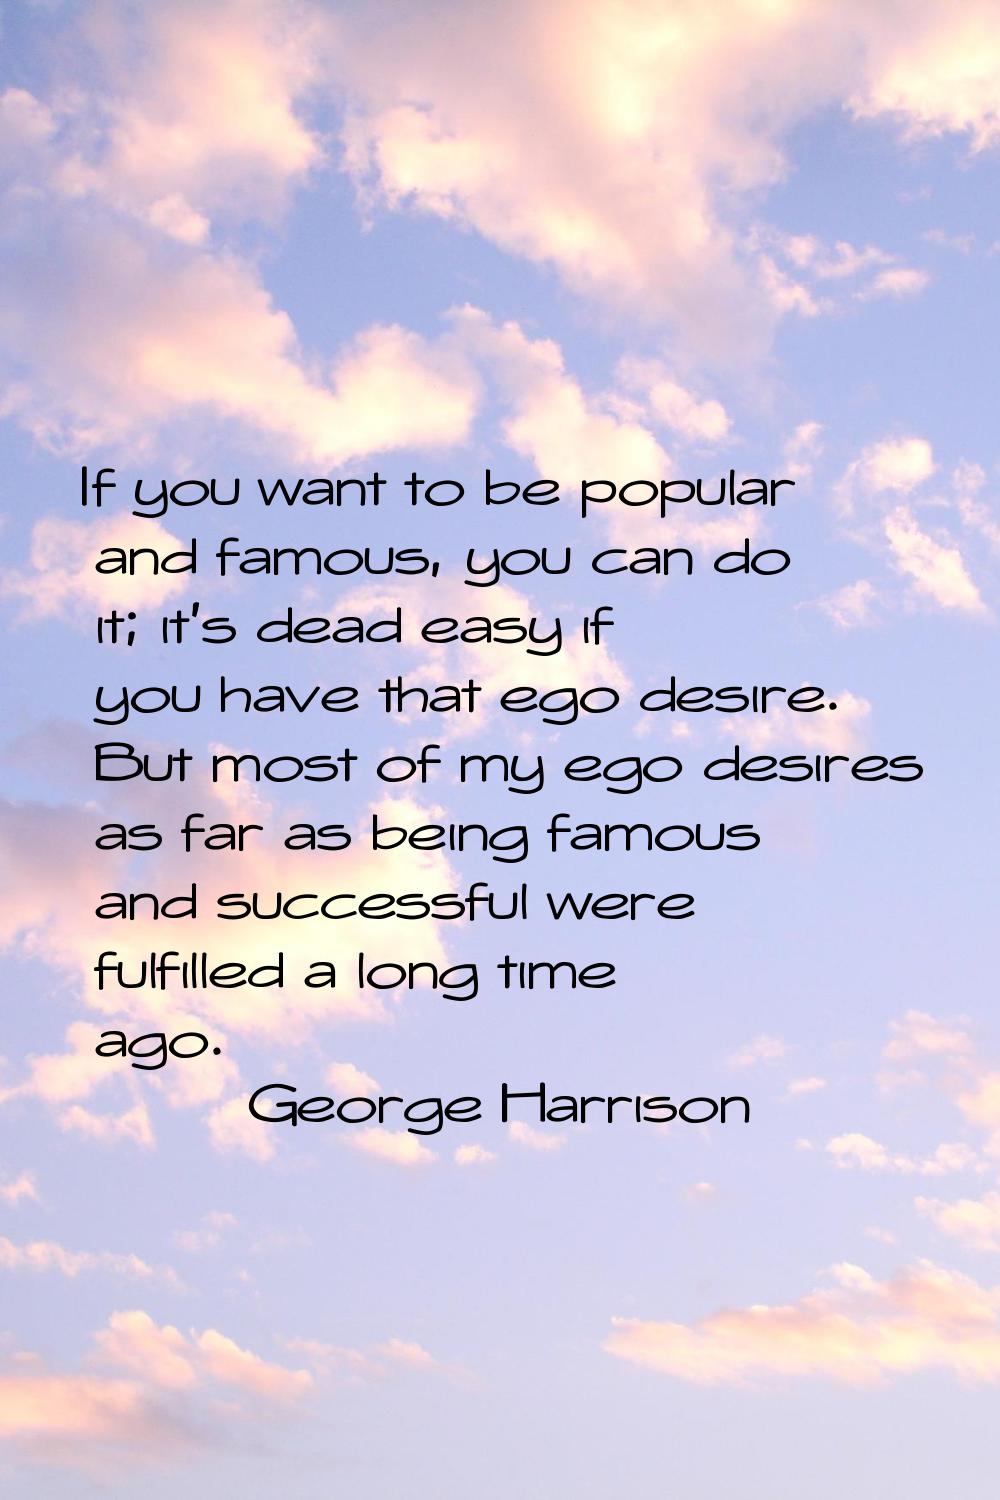 If you want to be popular and famous, you can do it; it's dead easy if you have that ego desire. Bu